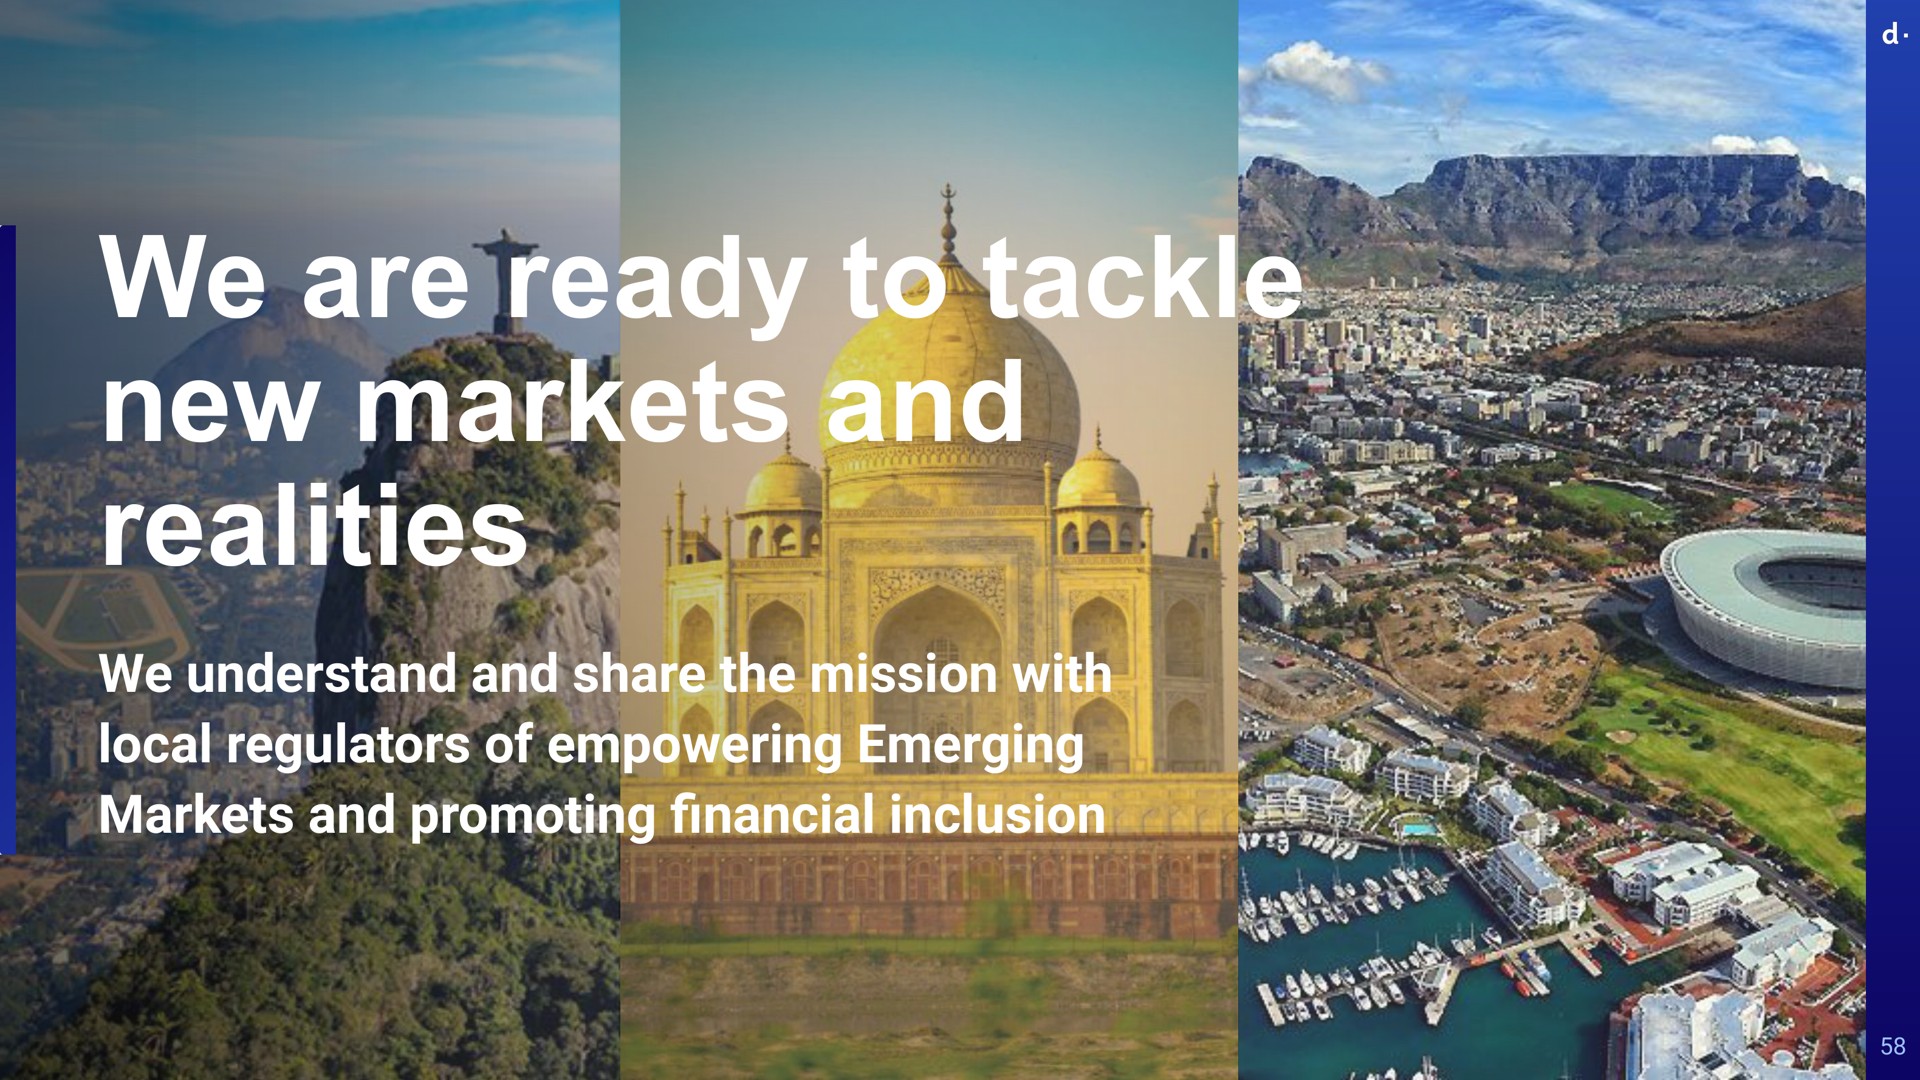 we are ready to tackle new markets and realities we understand and share the mission with local regulators of empowering emerging markets and promoting inclusion | dLocal